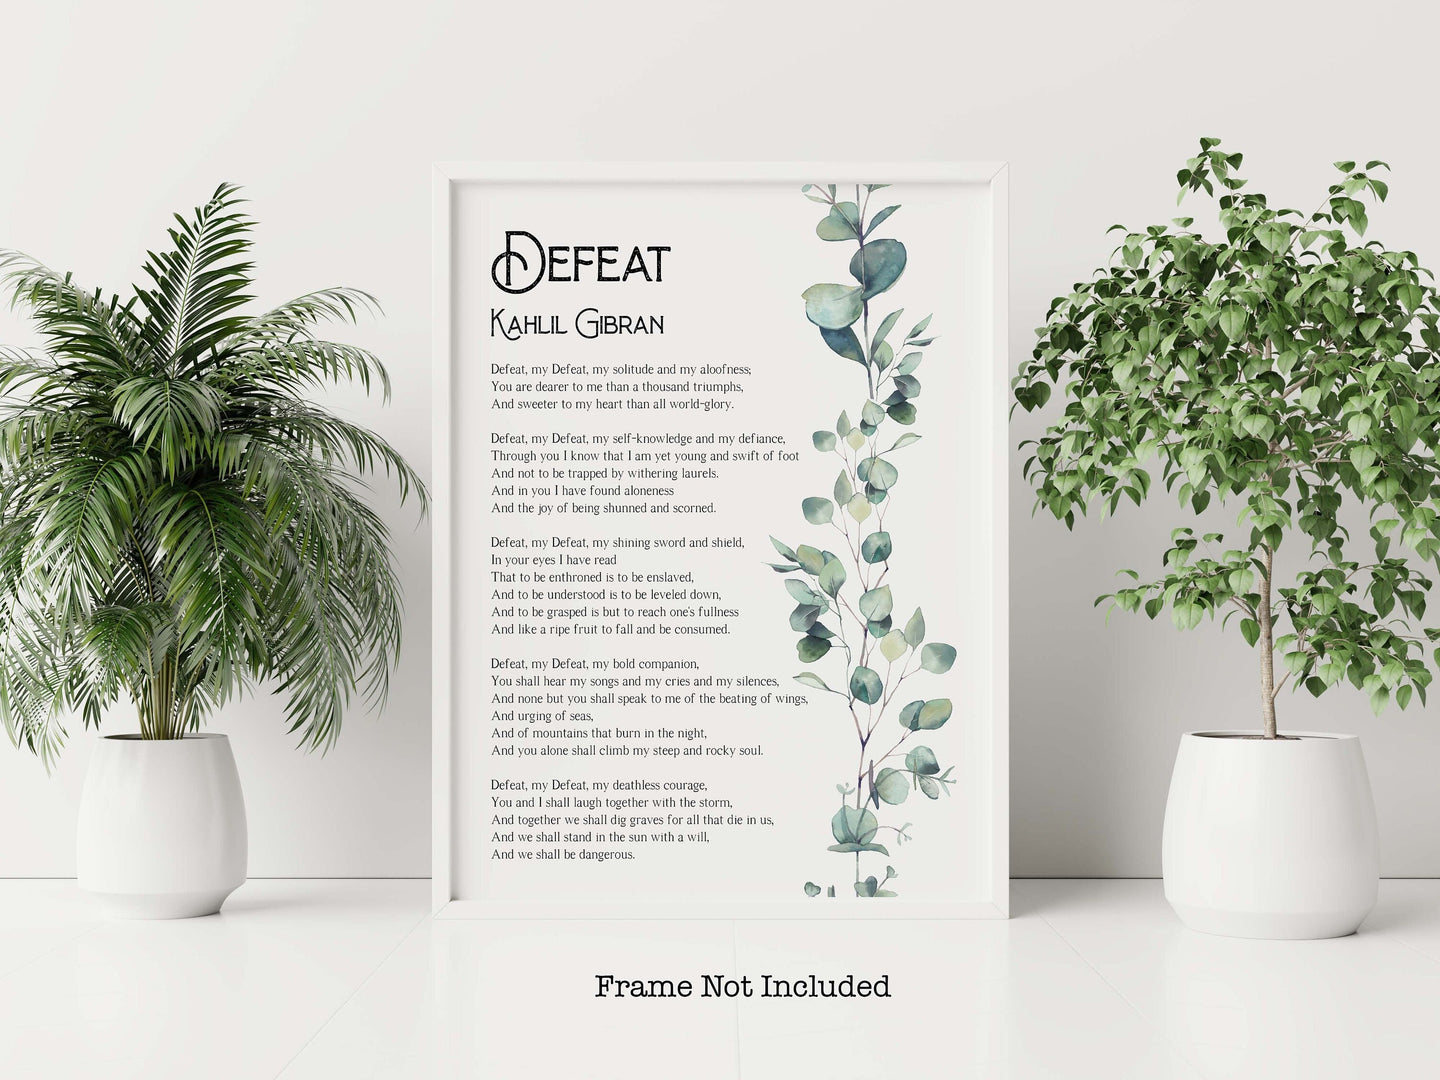 Defeat, Kahlil Gibran Poem - Art Print Home office Decor poetry wall art - Physical Art Print Without Frame